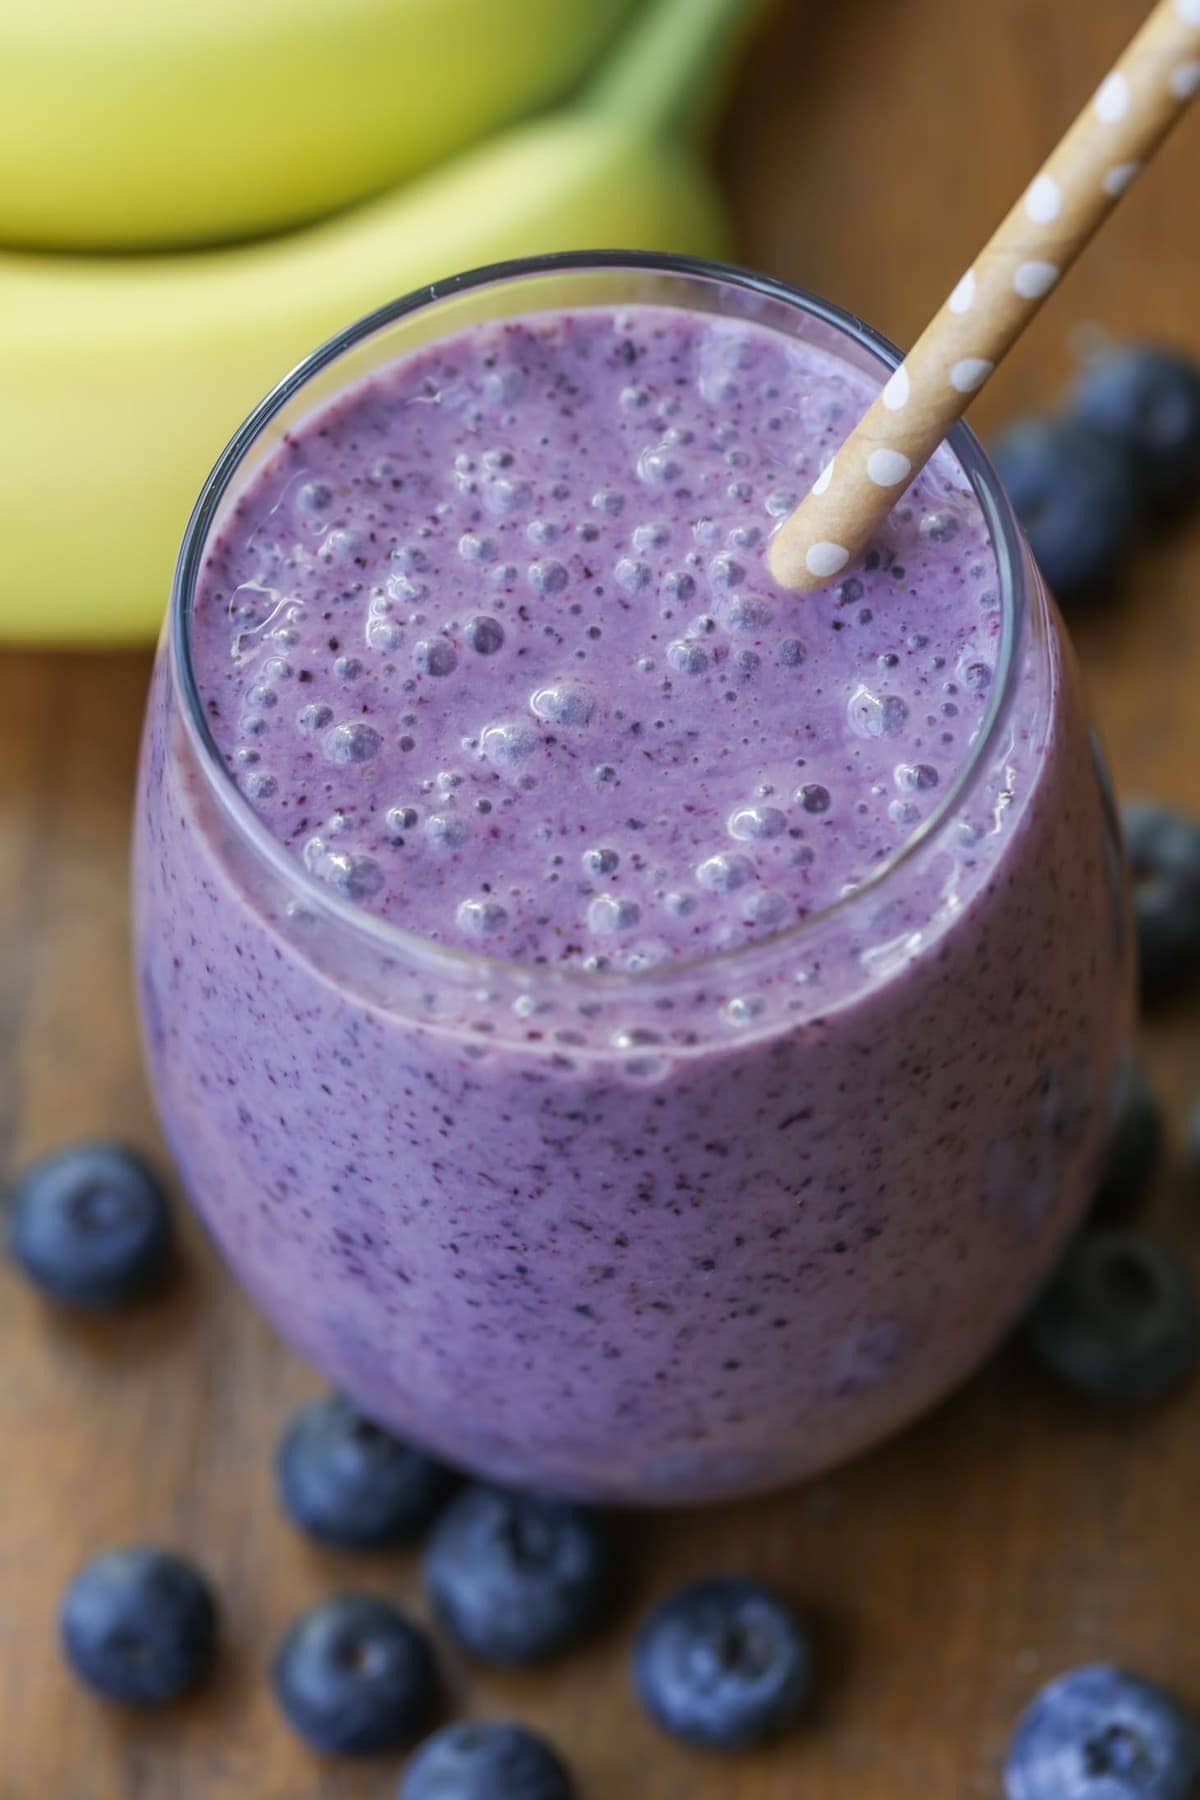 Blueberry smoothie served in a glass with a straw.